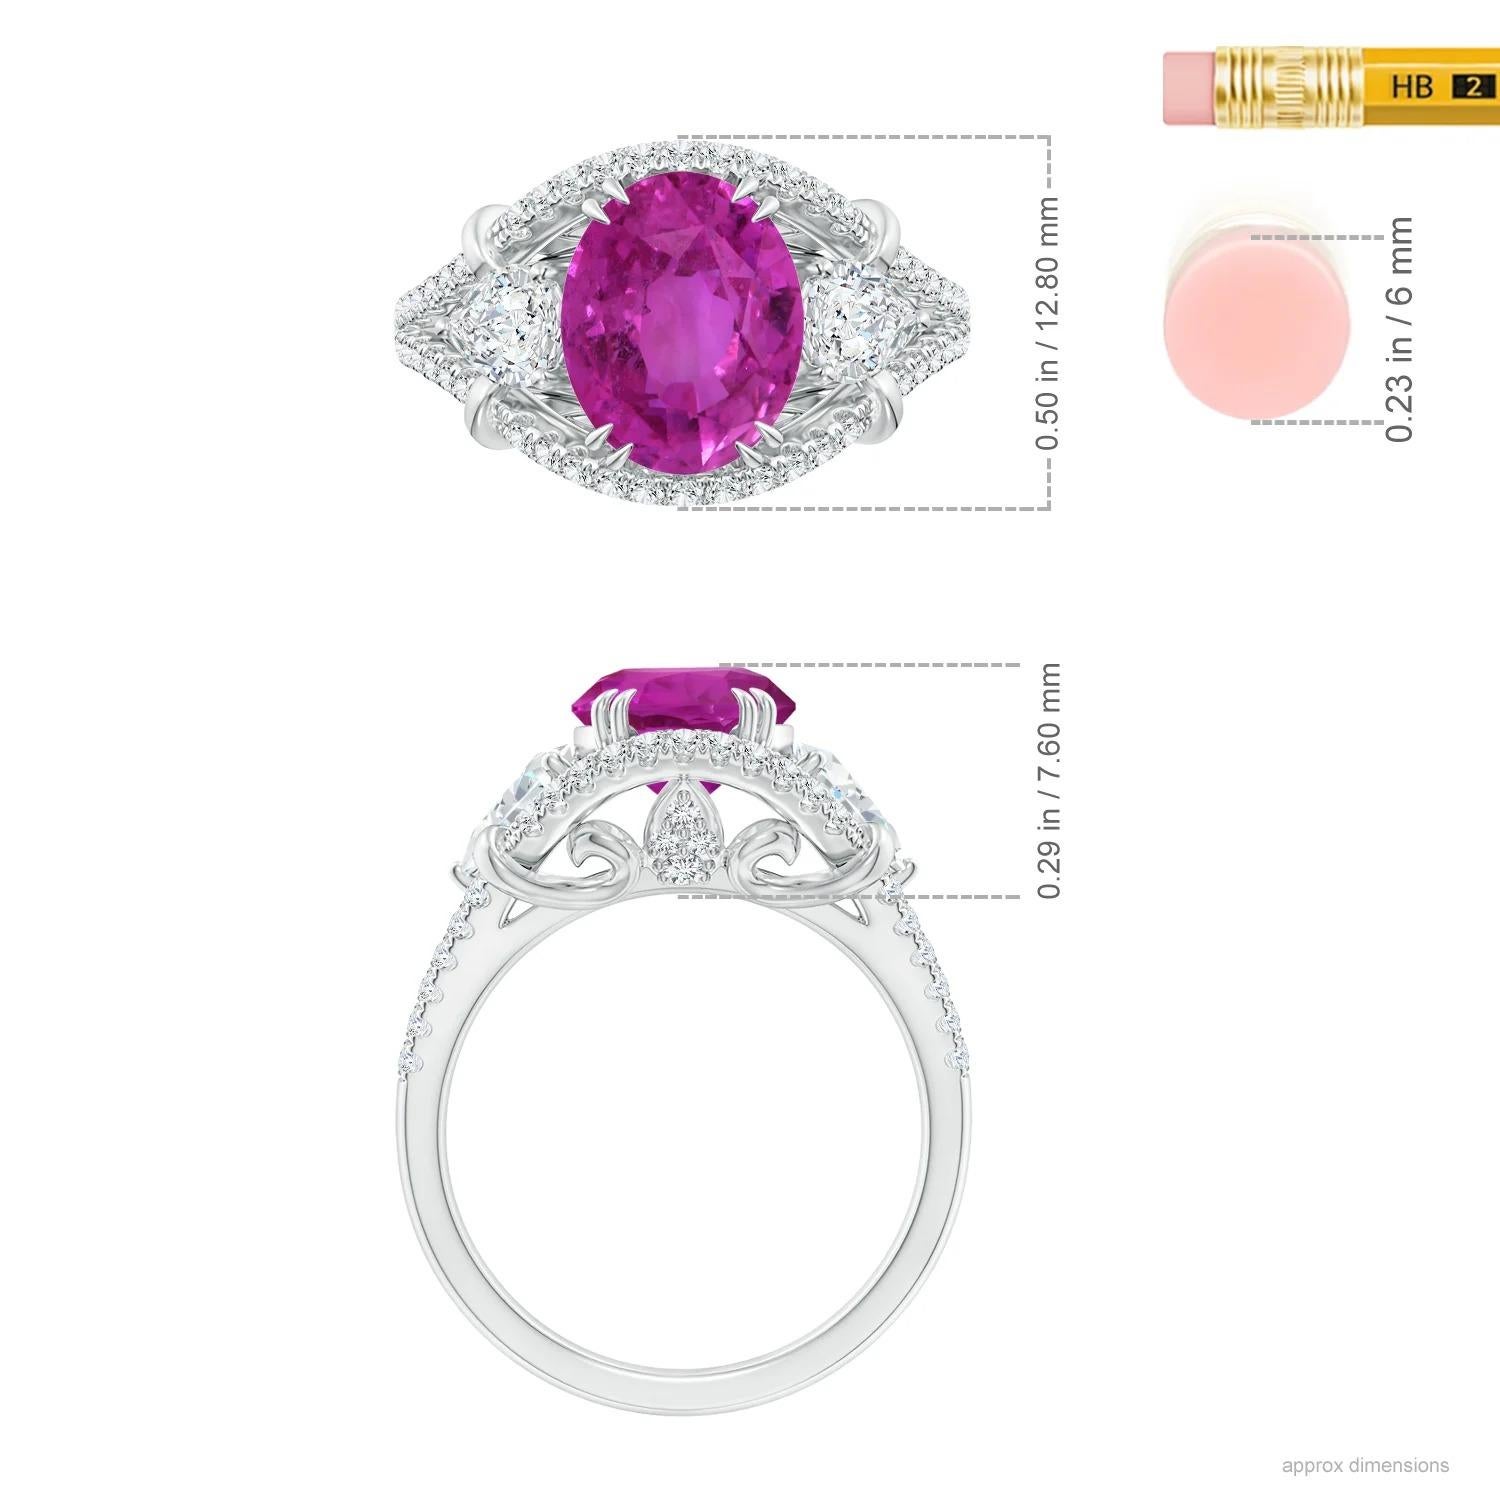 For Sale:  GIA Certified Natural Pink Sapphire Ring in White Gold with Diamonds 6